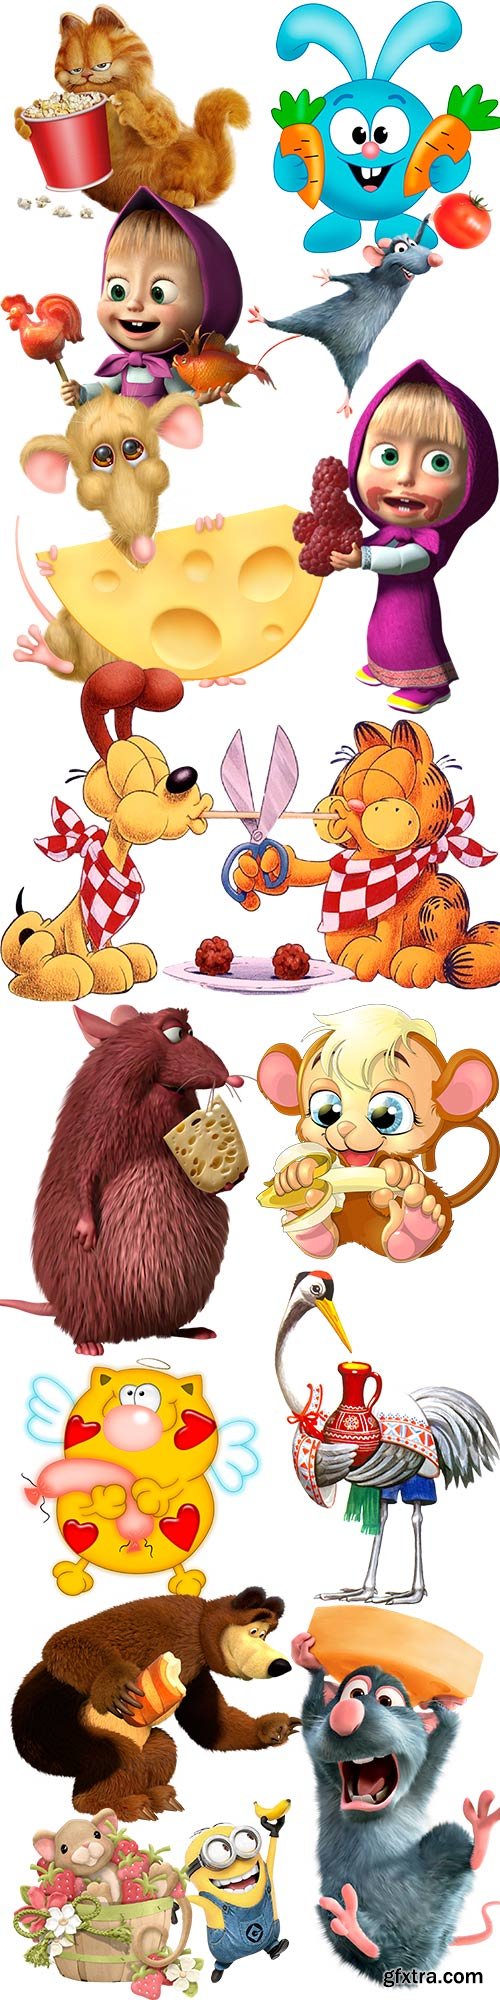 Cartoon characters with food